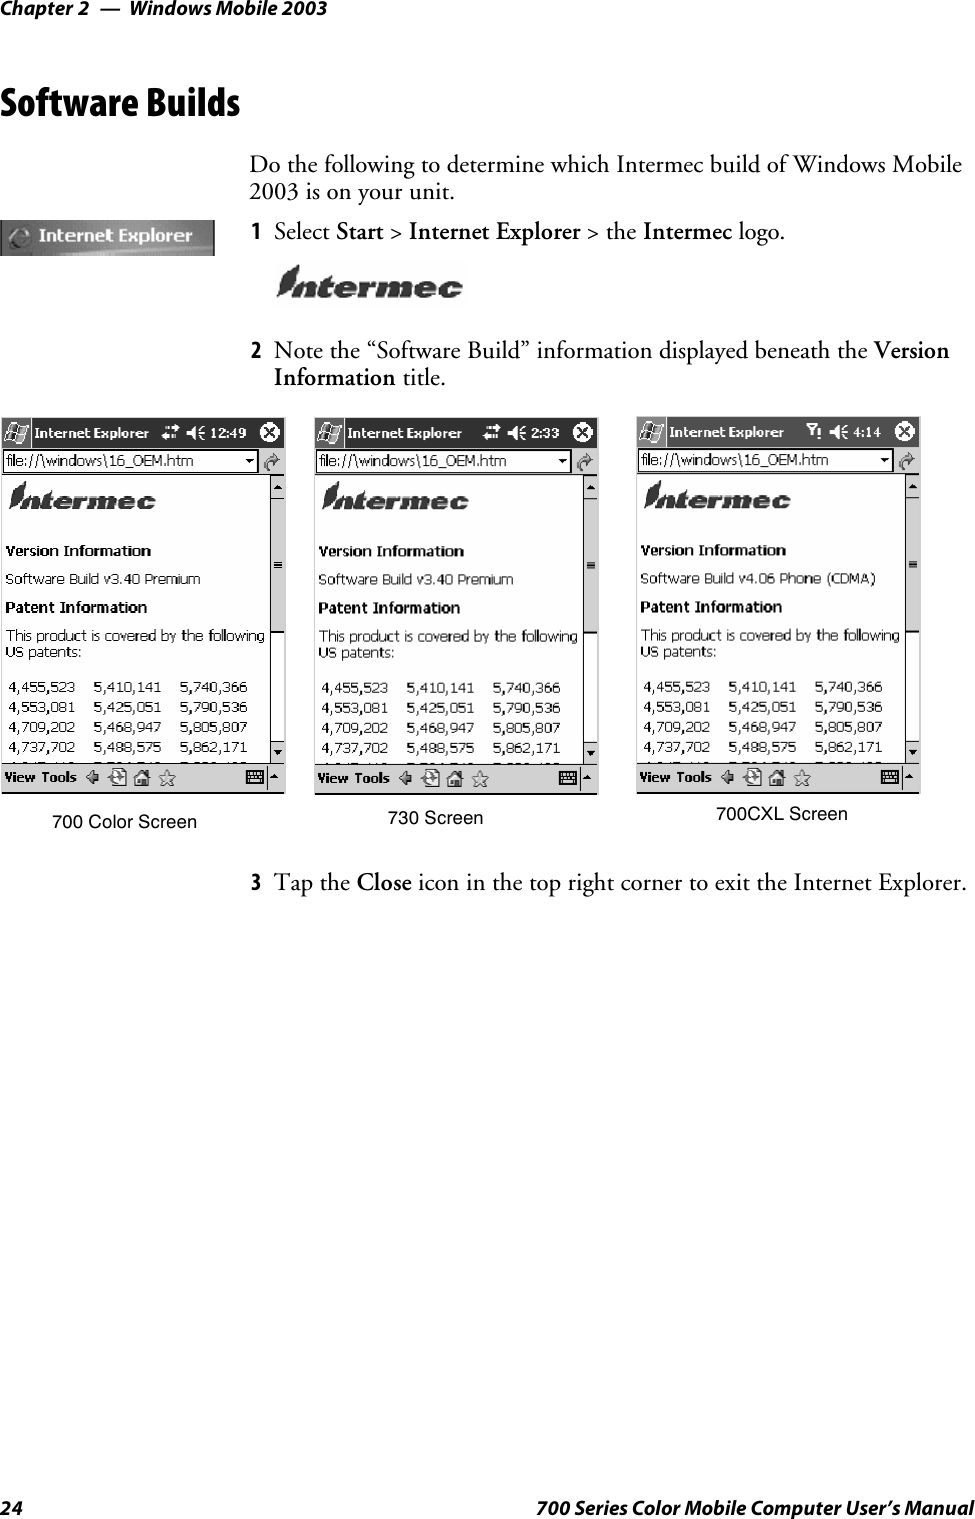 Windows Mobile 2003Chapter —224 700 Series Color Mobile Computer User’s ManualSoftware BuildsDo the following to determine which Intermec build of Windows Mobile2003 is on your unit.1Select Start &gt;Internet Explorer &gt;theIntermec logo.2Note the “Software Build” information displayed beneath the VersionInformation title.700 Color Screen 730 Screen 700CXL Screen3Tap the Close icon in the top right corner to exit the Internet Explorer.